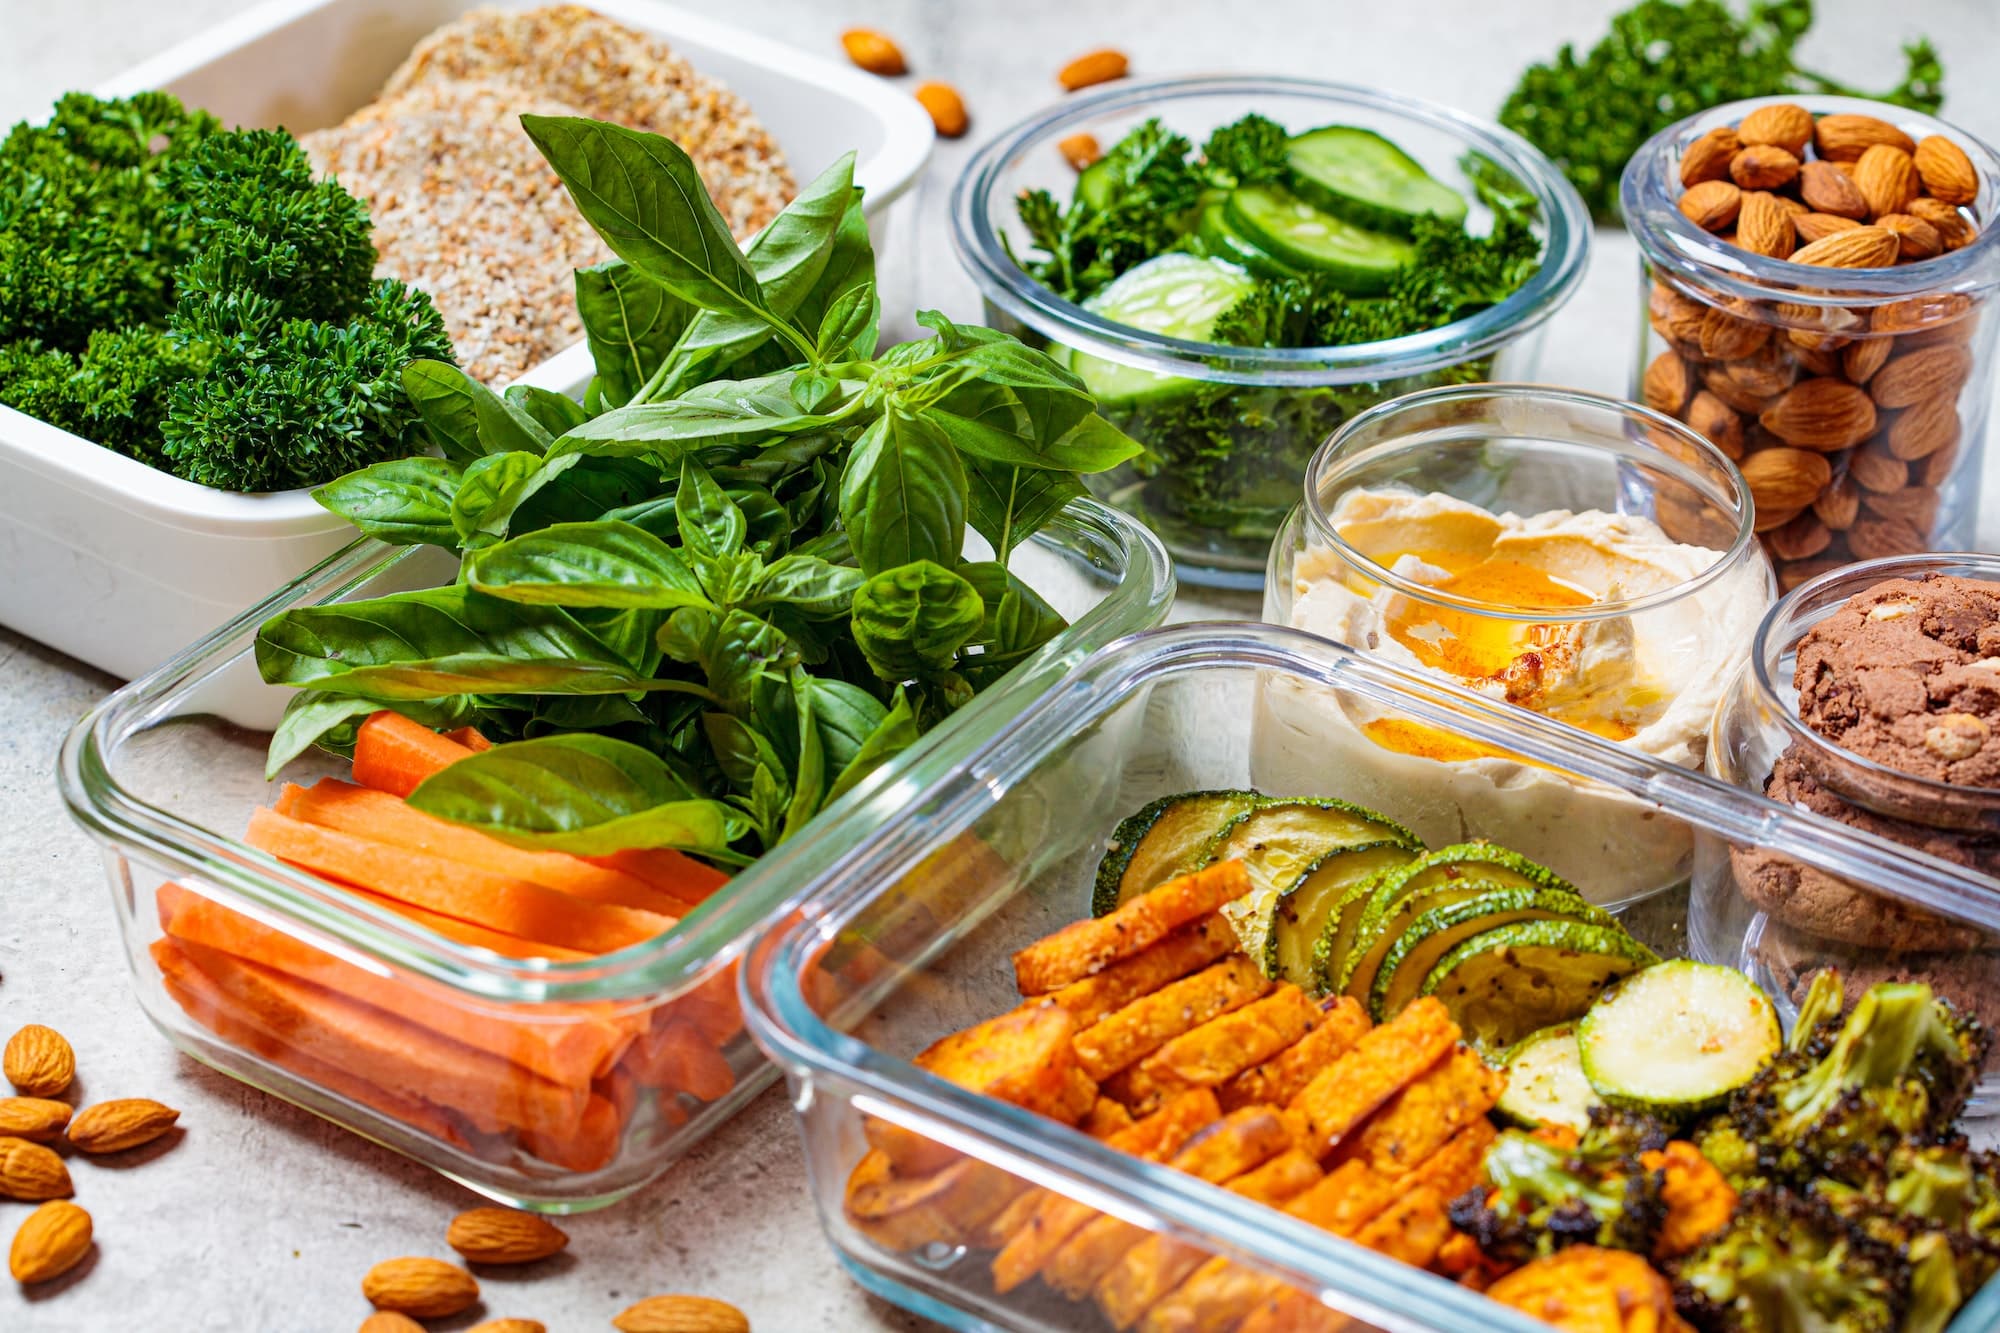 10 Easy and Nutritious Meal Prep Ideas for Busy Individuals